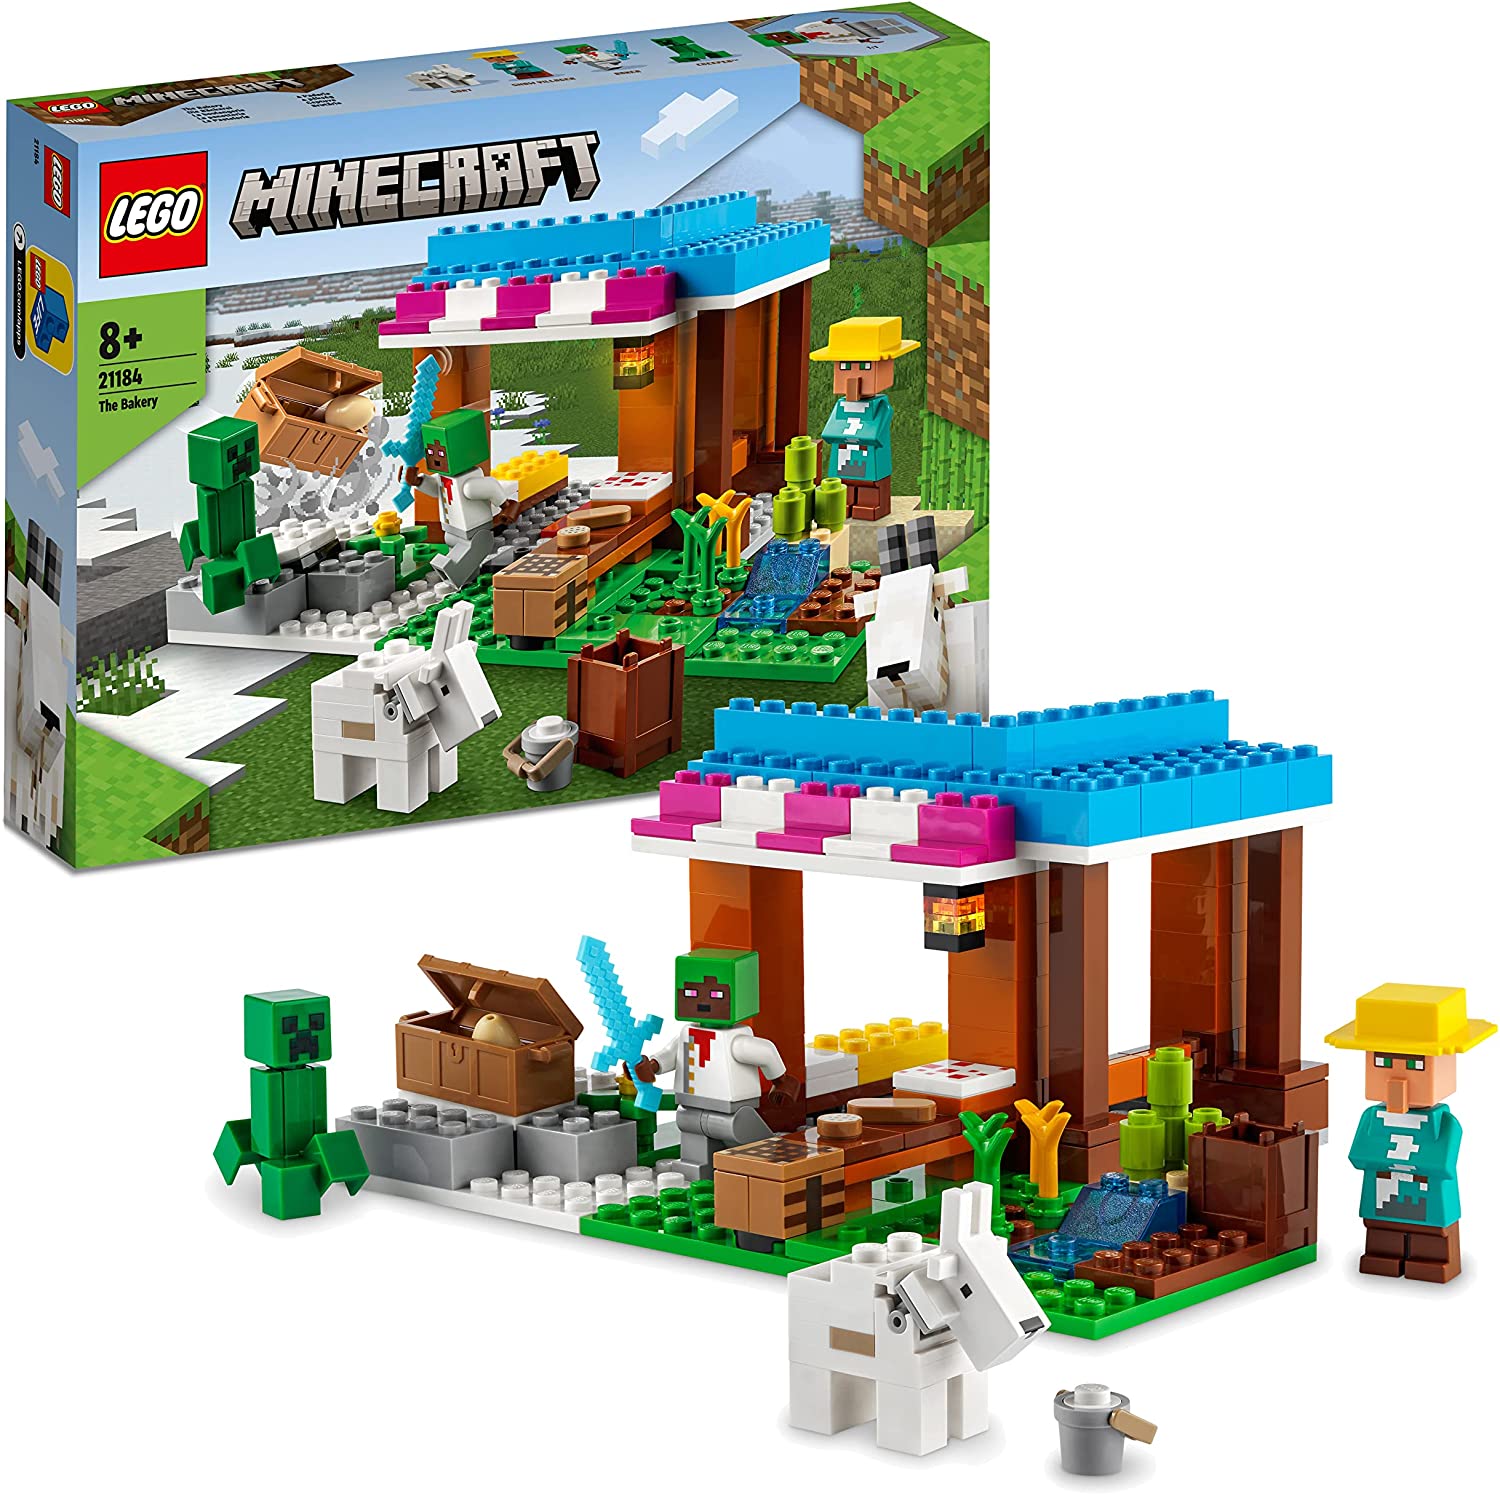 LEGO 21184 Minecraft The Bakery Modular Toy Set with Creeper and Goat Figure, Construction Toy for Children from 8 Years